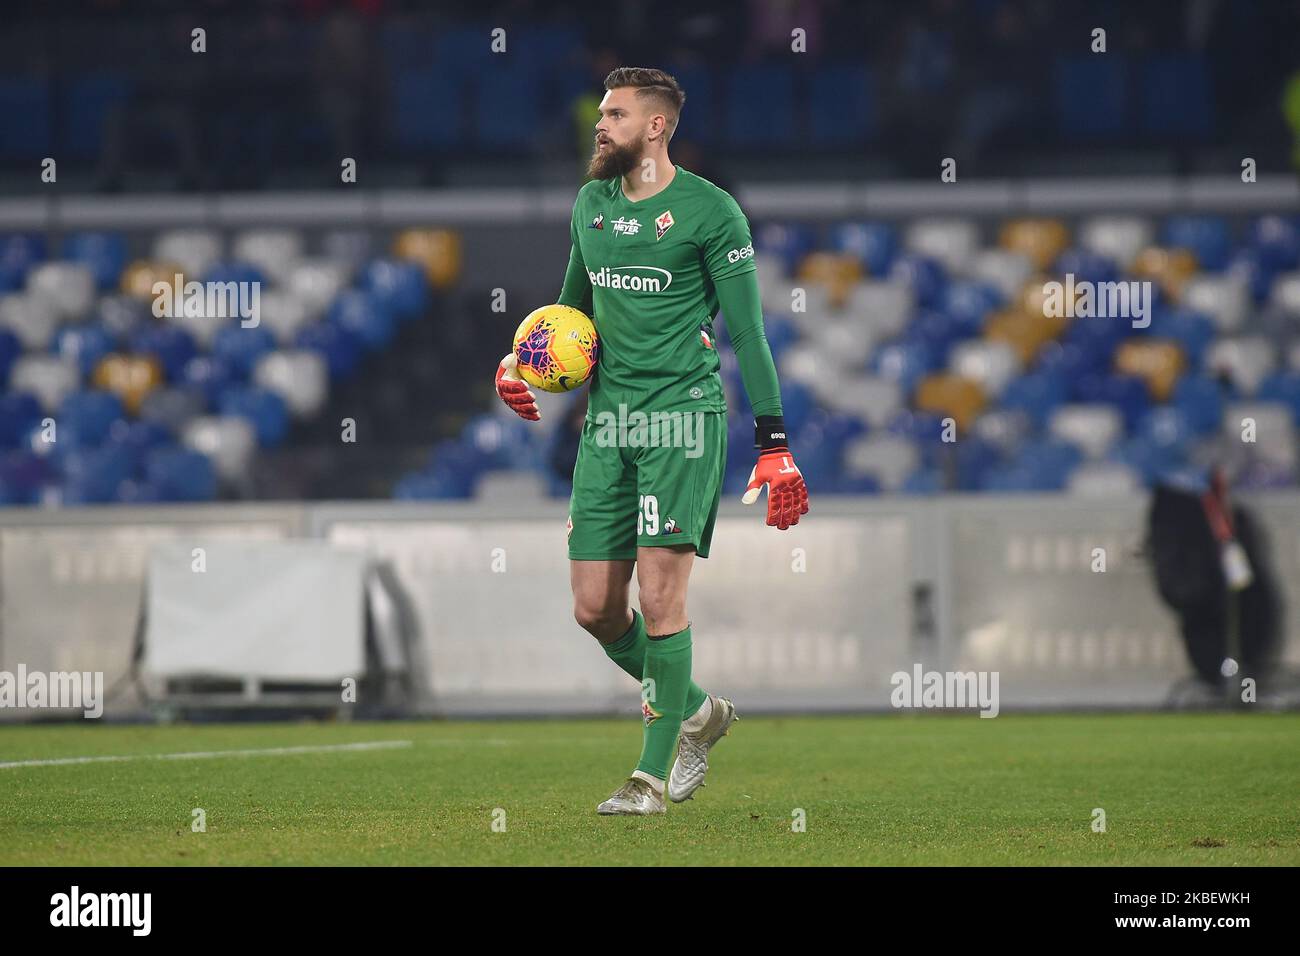 Bartlomiej Dragowski of ACF Fiorentina during the Serie A match between SSC Napoli and ACF Fiorentina at Stadio San Paolo Naples Italy on 18 January 2020. (Photo by Franco Romano/NurPhoto) Stock Photo